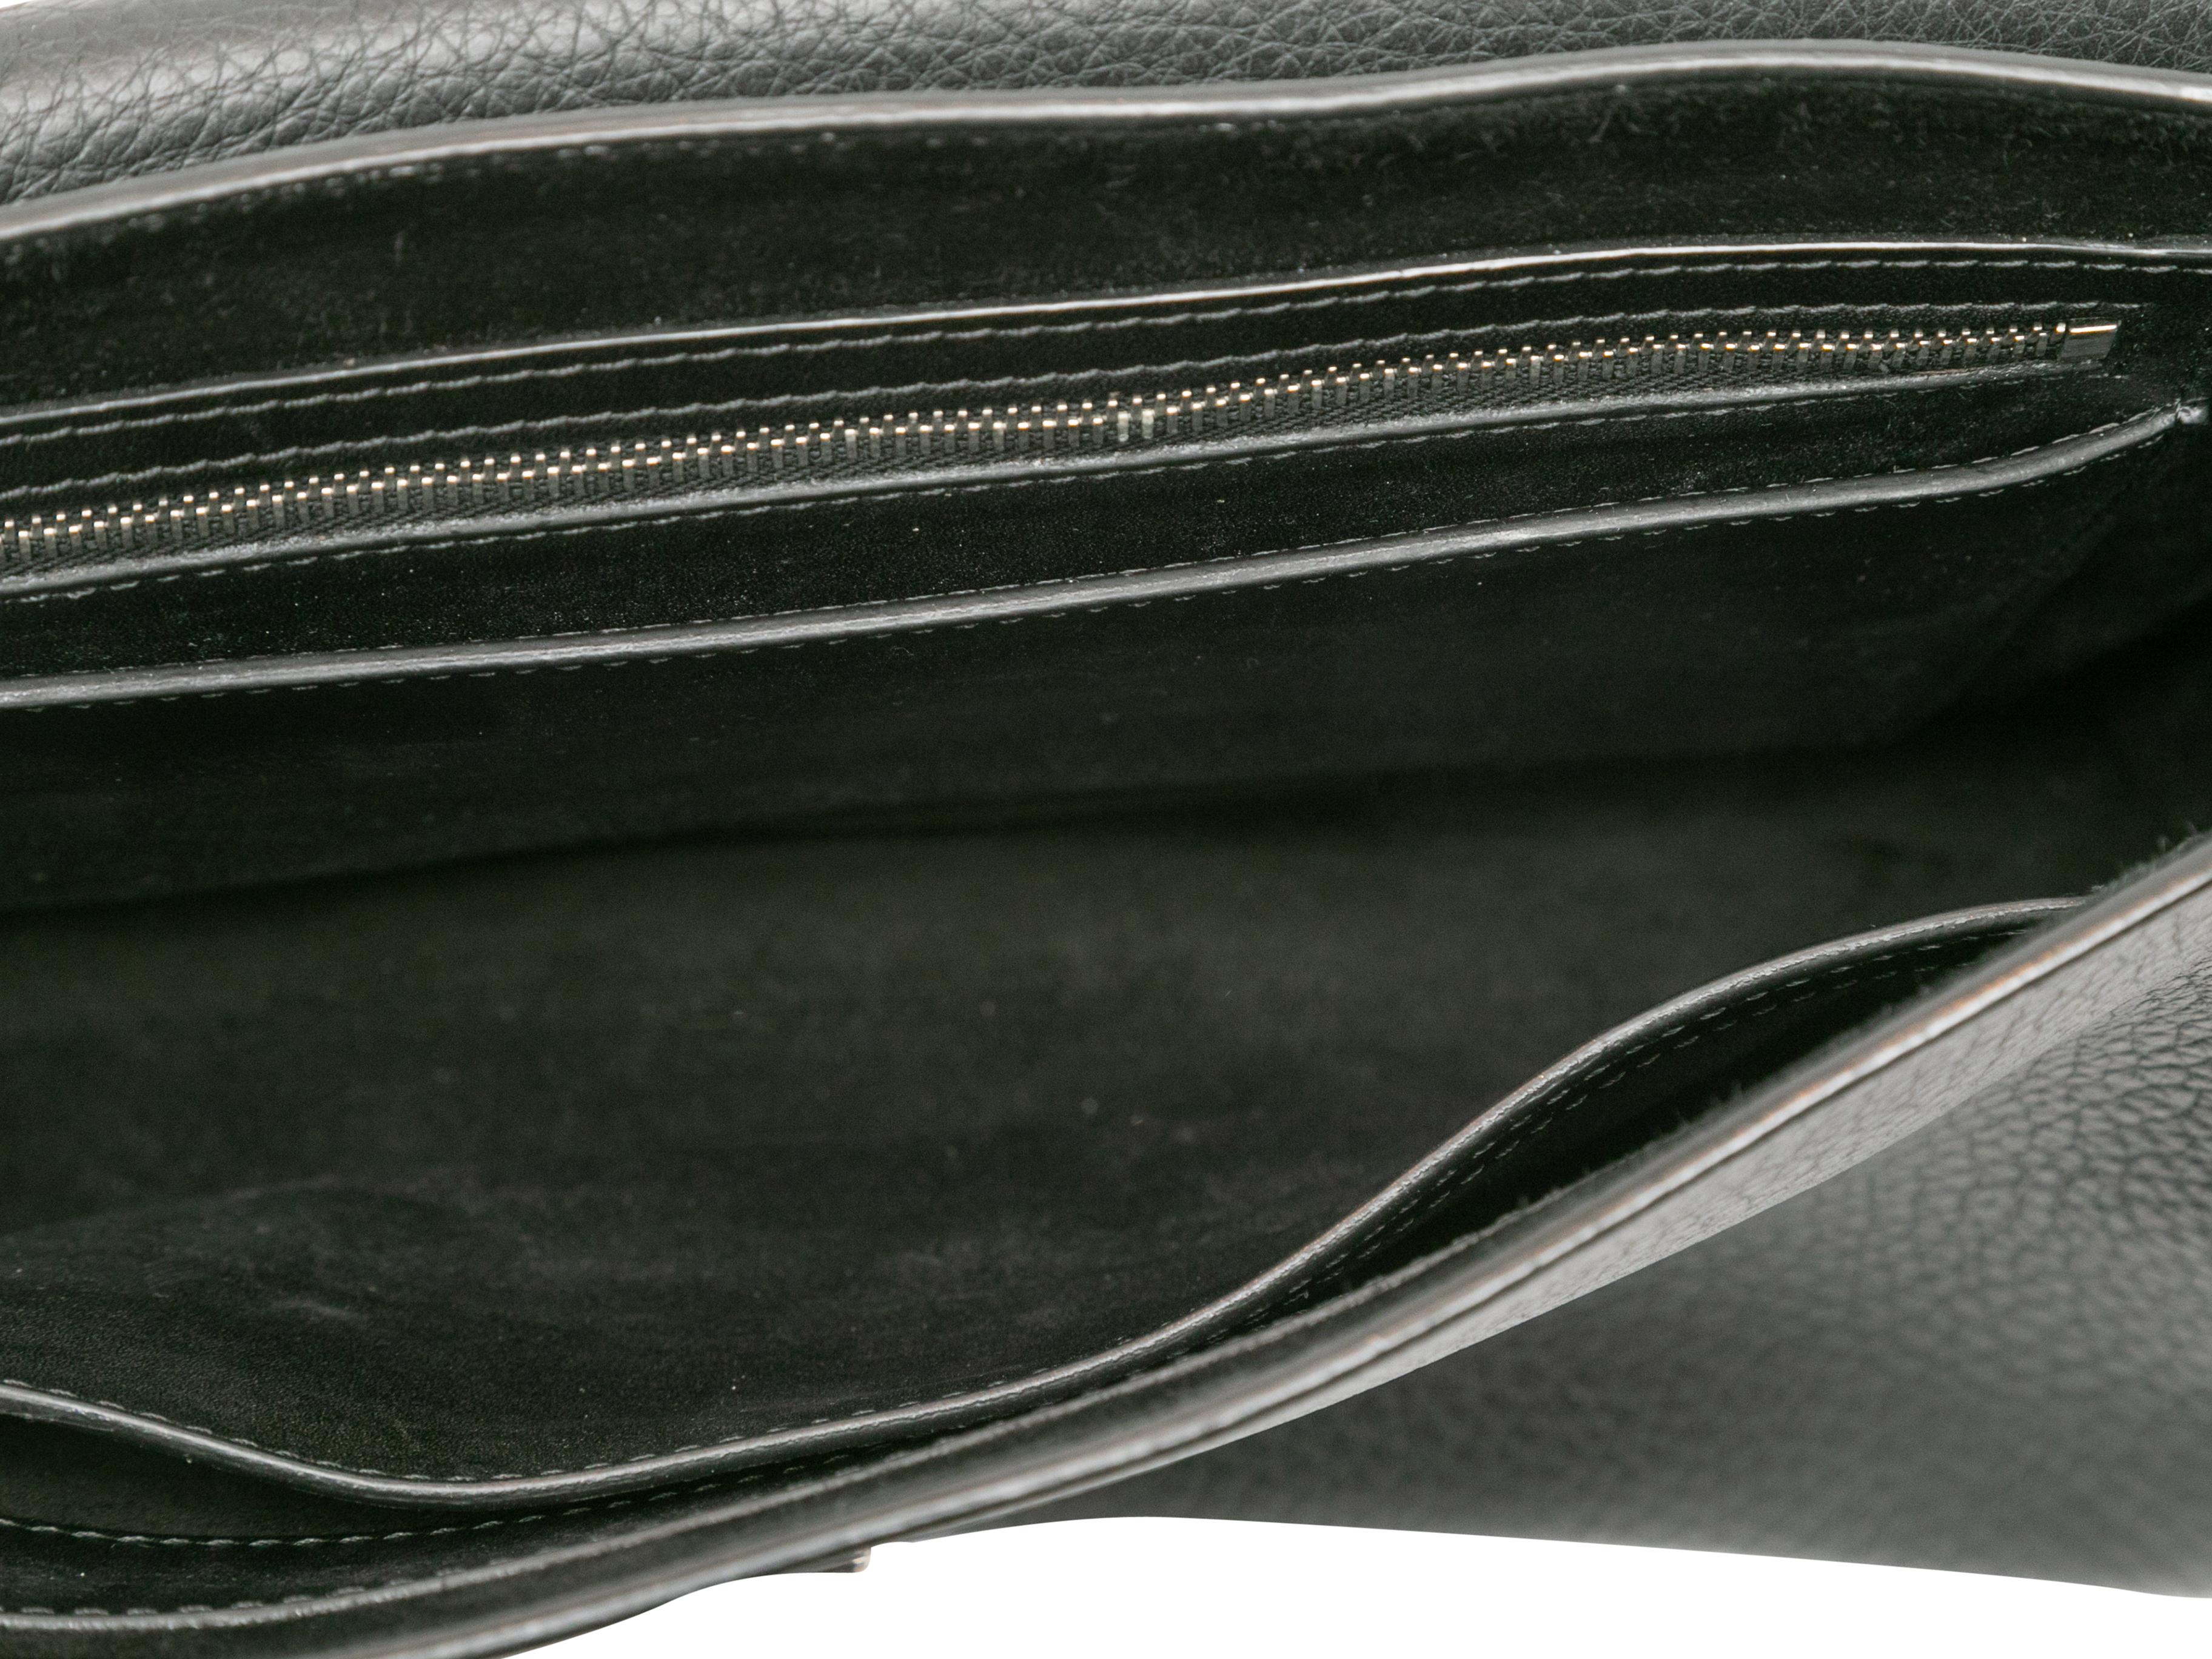 Black Proenza Schouler Leather Shoulder Bag In Good Condition For Sale In New York, NY